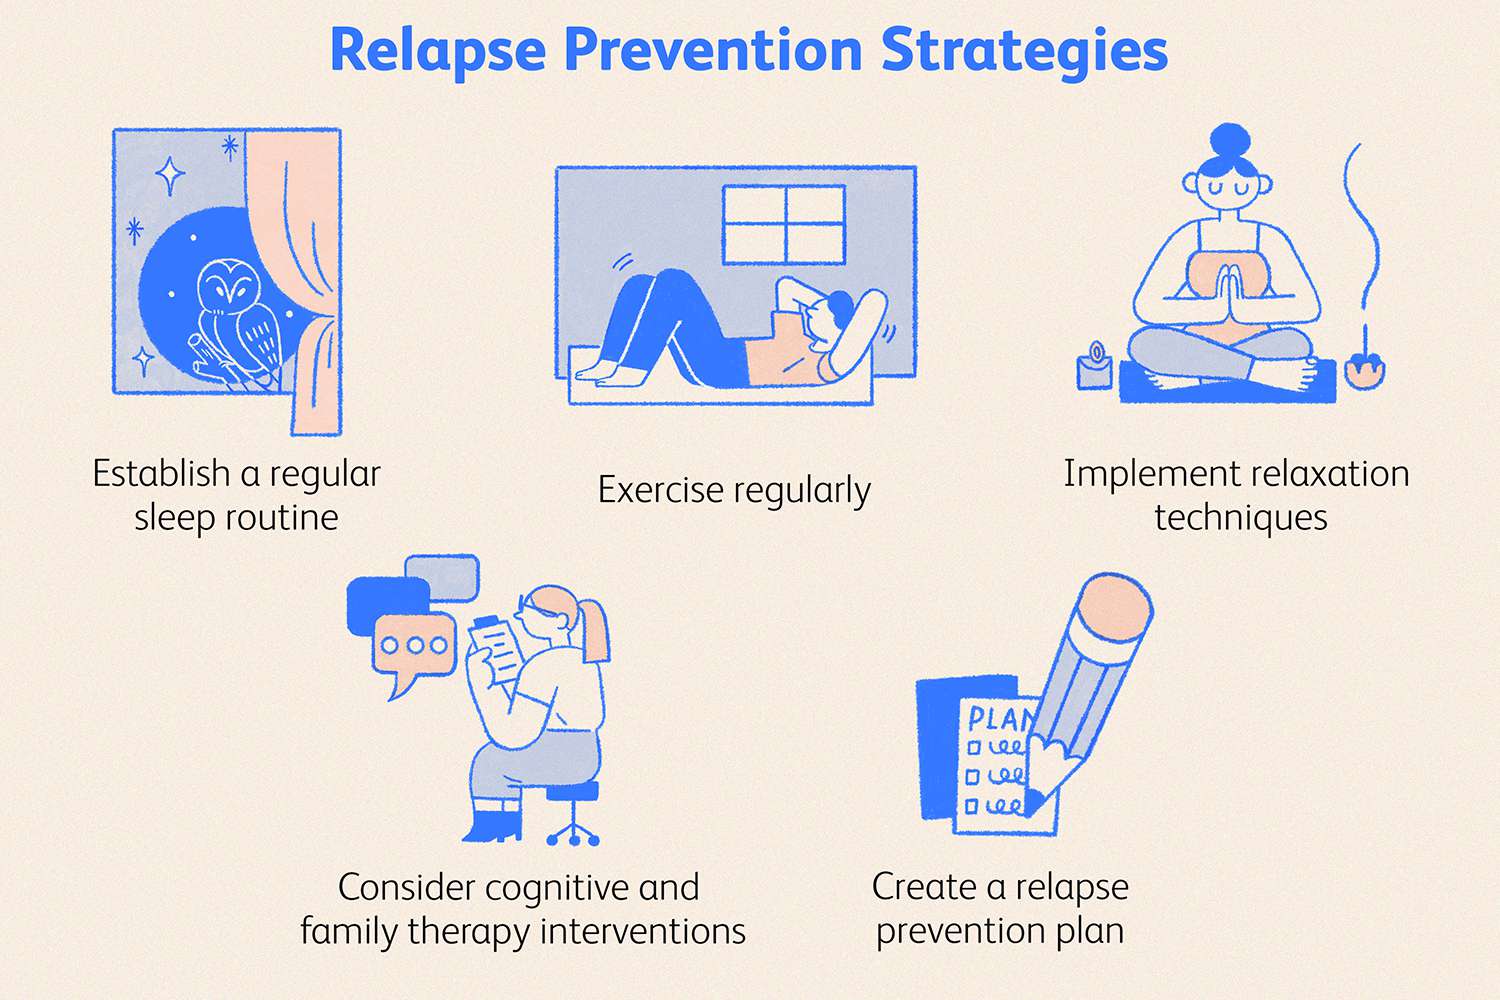 Illustration of relapse prevention strategies such as exercise, sleep routine, relaxation techniques, therapy interventions, and planning